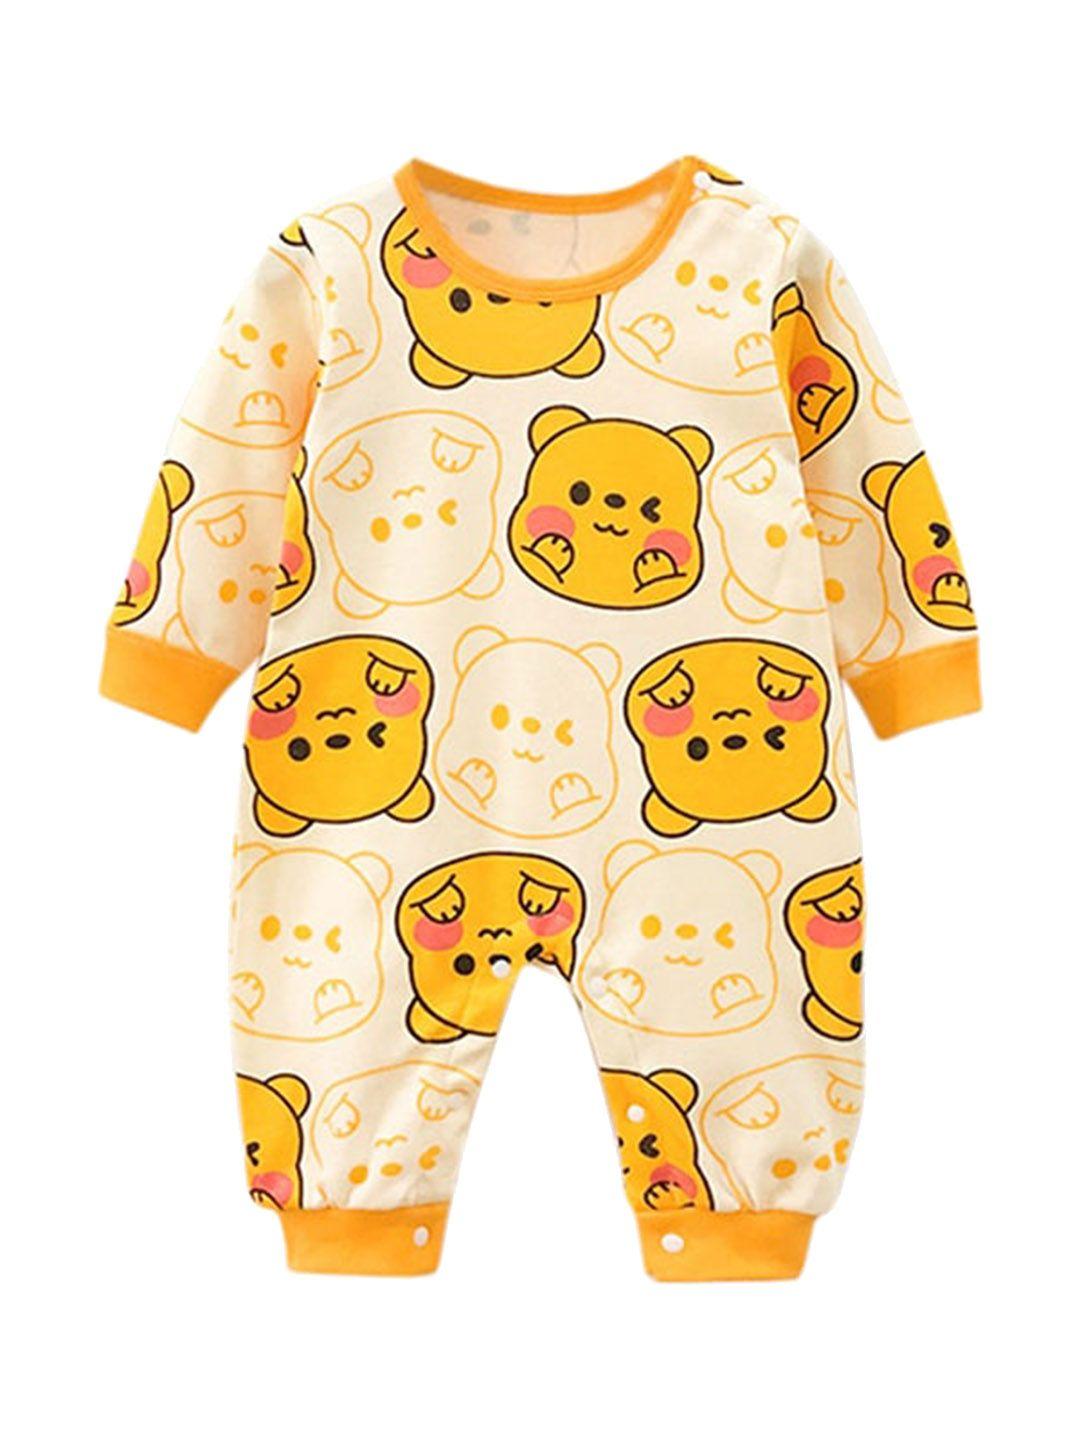 stylecast infant boys yellow printed cotton romper